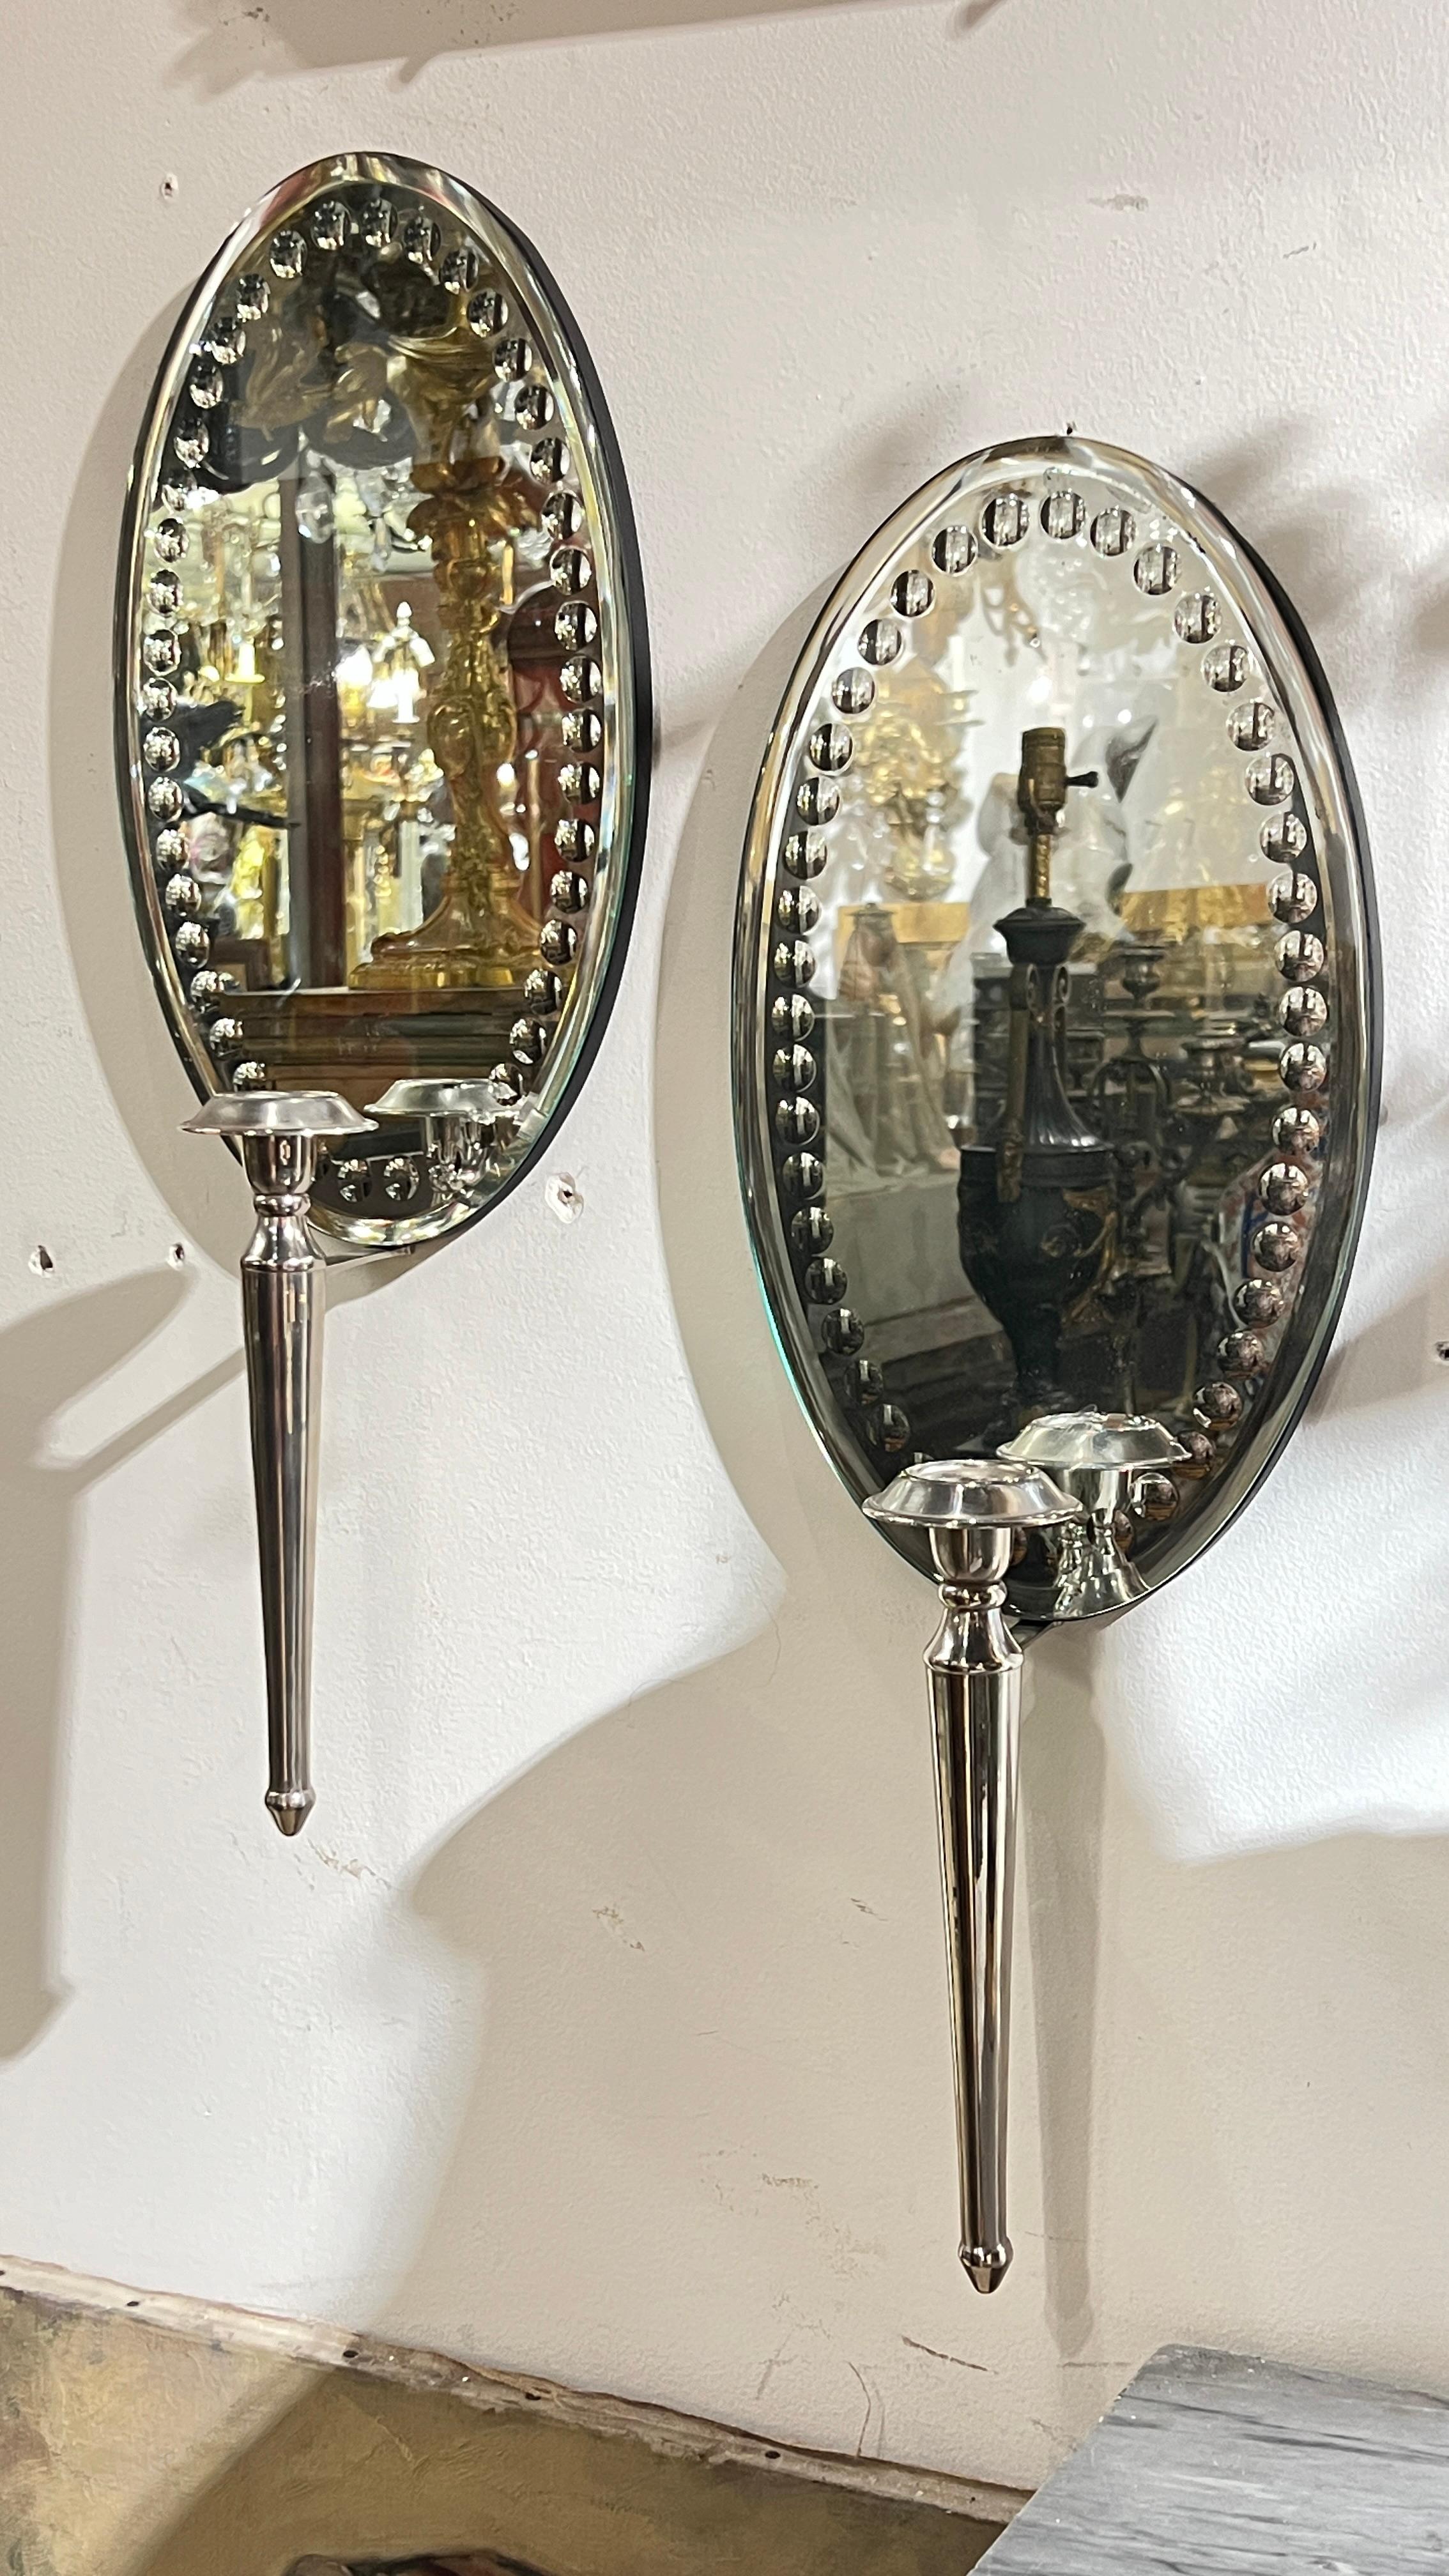 Pair of mid-century modern period mirror-back wall lights with oval shaped mirrored wall plates decorated with engraved circular dot boarder.  21 by 8 by 4 inches.  Not wired.